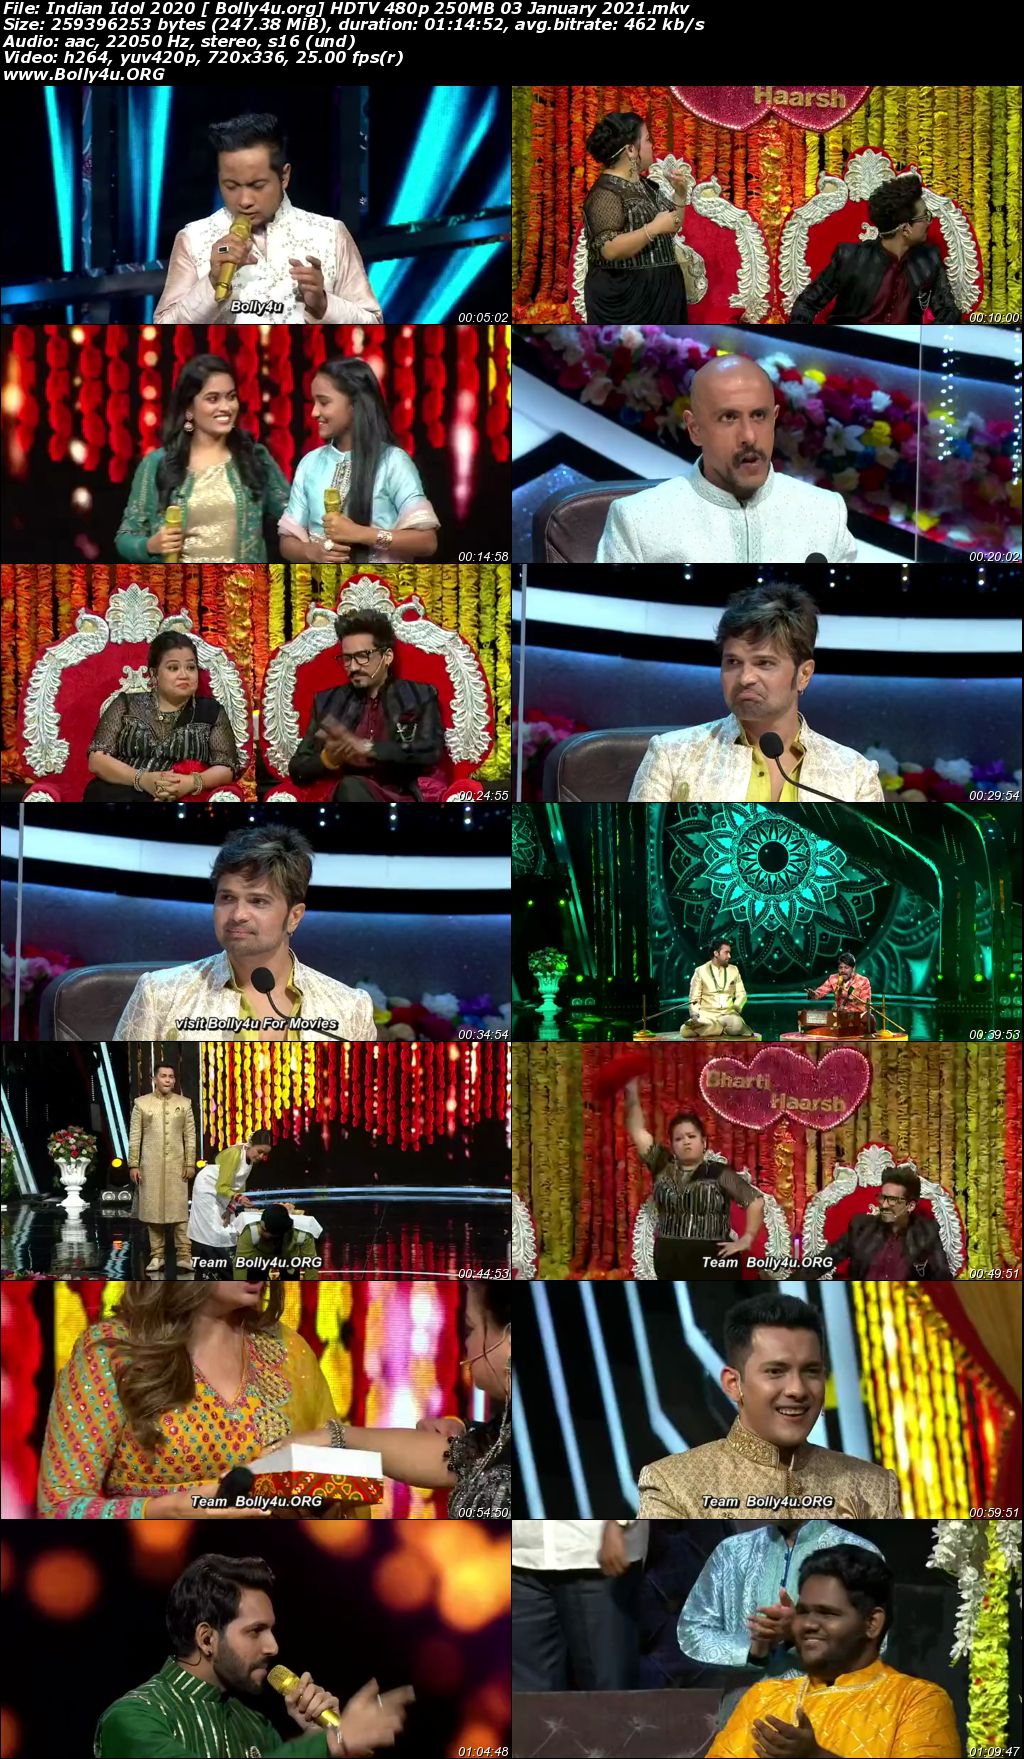 Indian Idol 2020 HDTV 480p 250MB 03 January 2021 Download